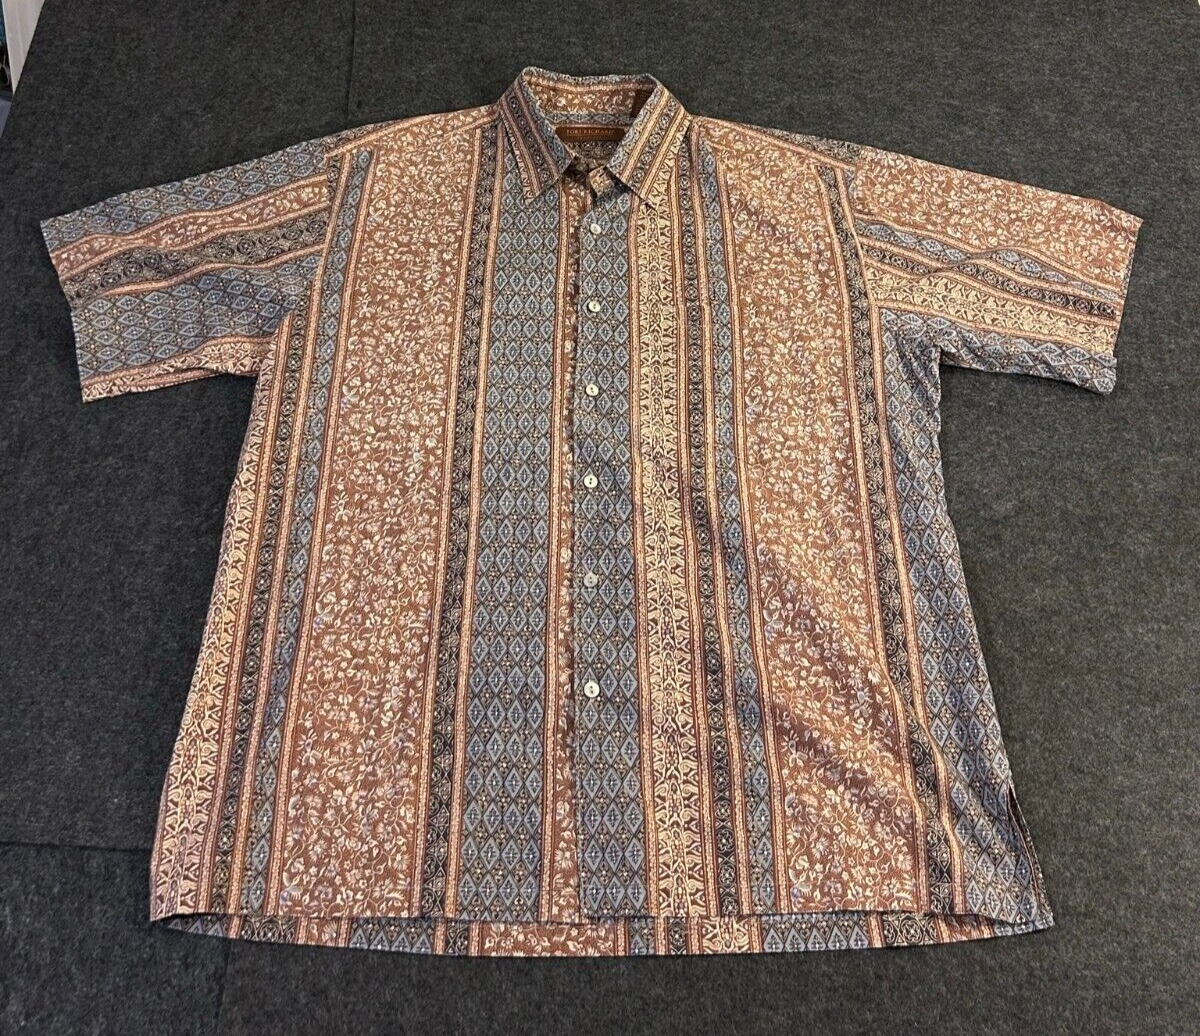 Primary image for Tori Richard Button Up Shirt Men's Large Brown Blue Hawaiian Made In USA